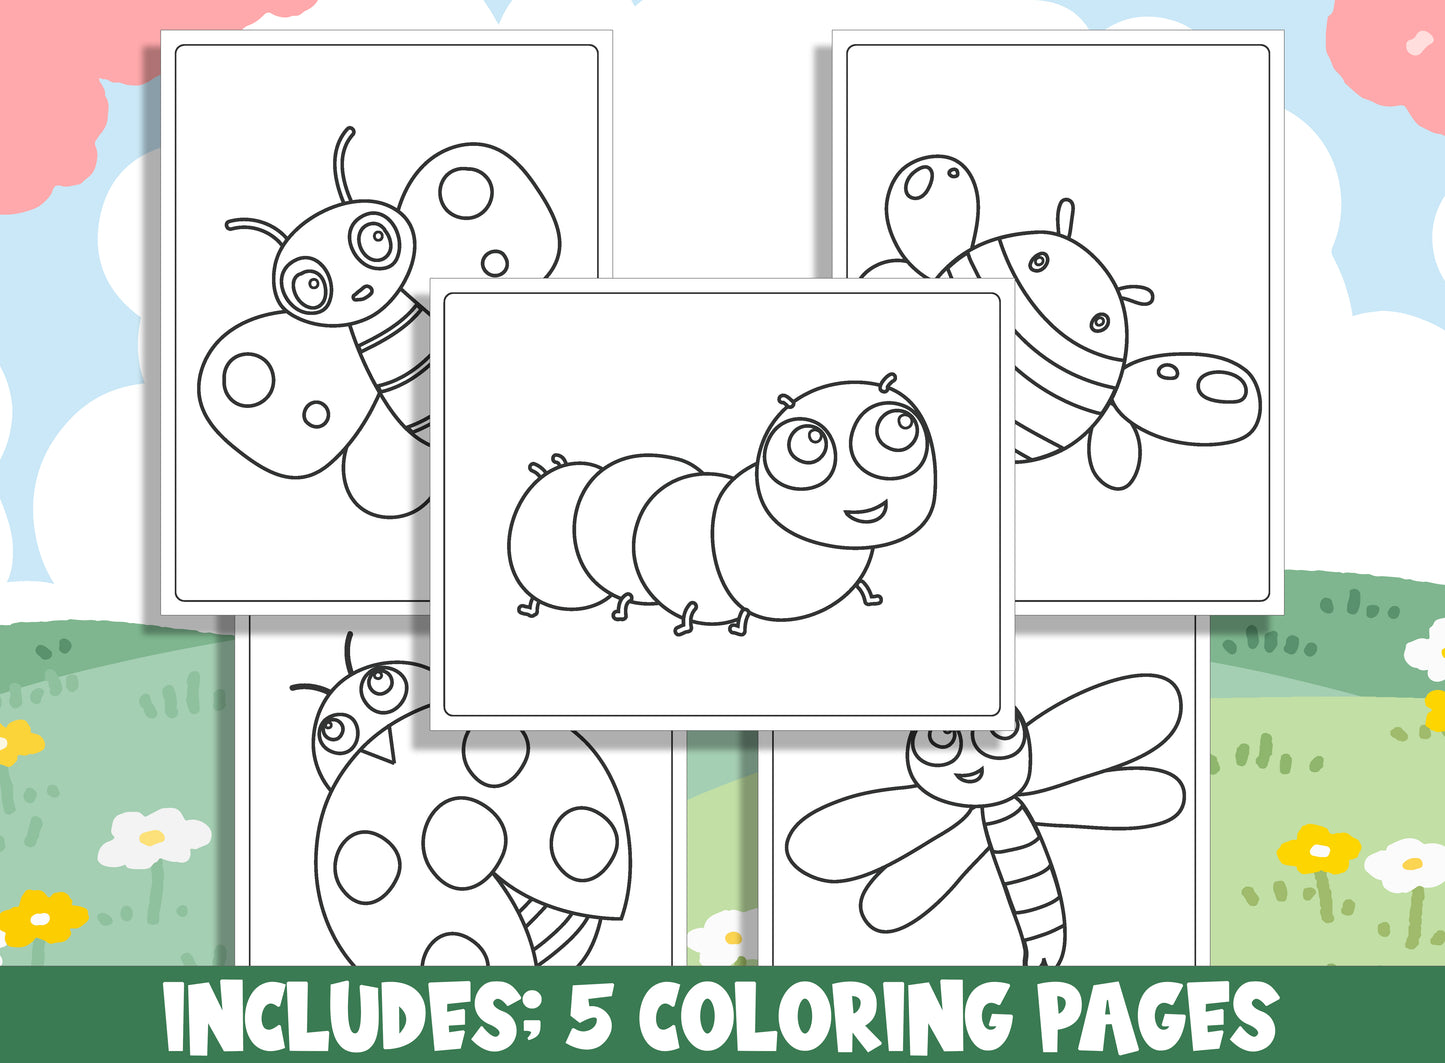 Learn How to Draw Insects (Butterfly, Bee, Ladybug, Dragonfly, Caterpillar), Directed Drawing Step by Step Tutorial + 5 Coloring Pages